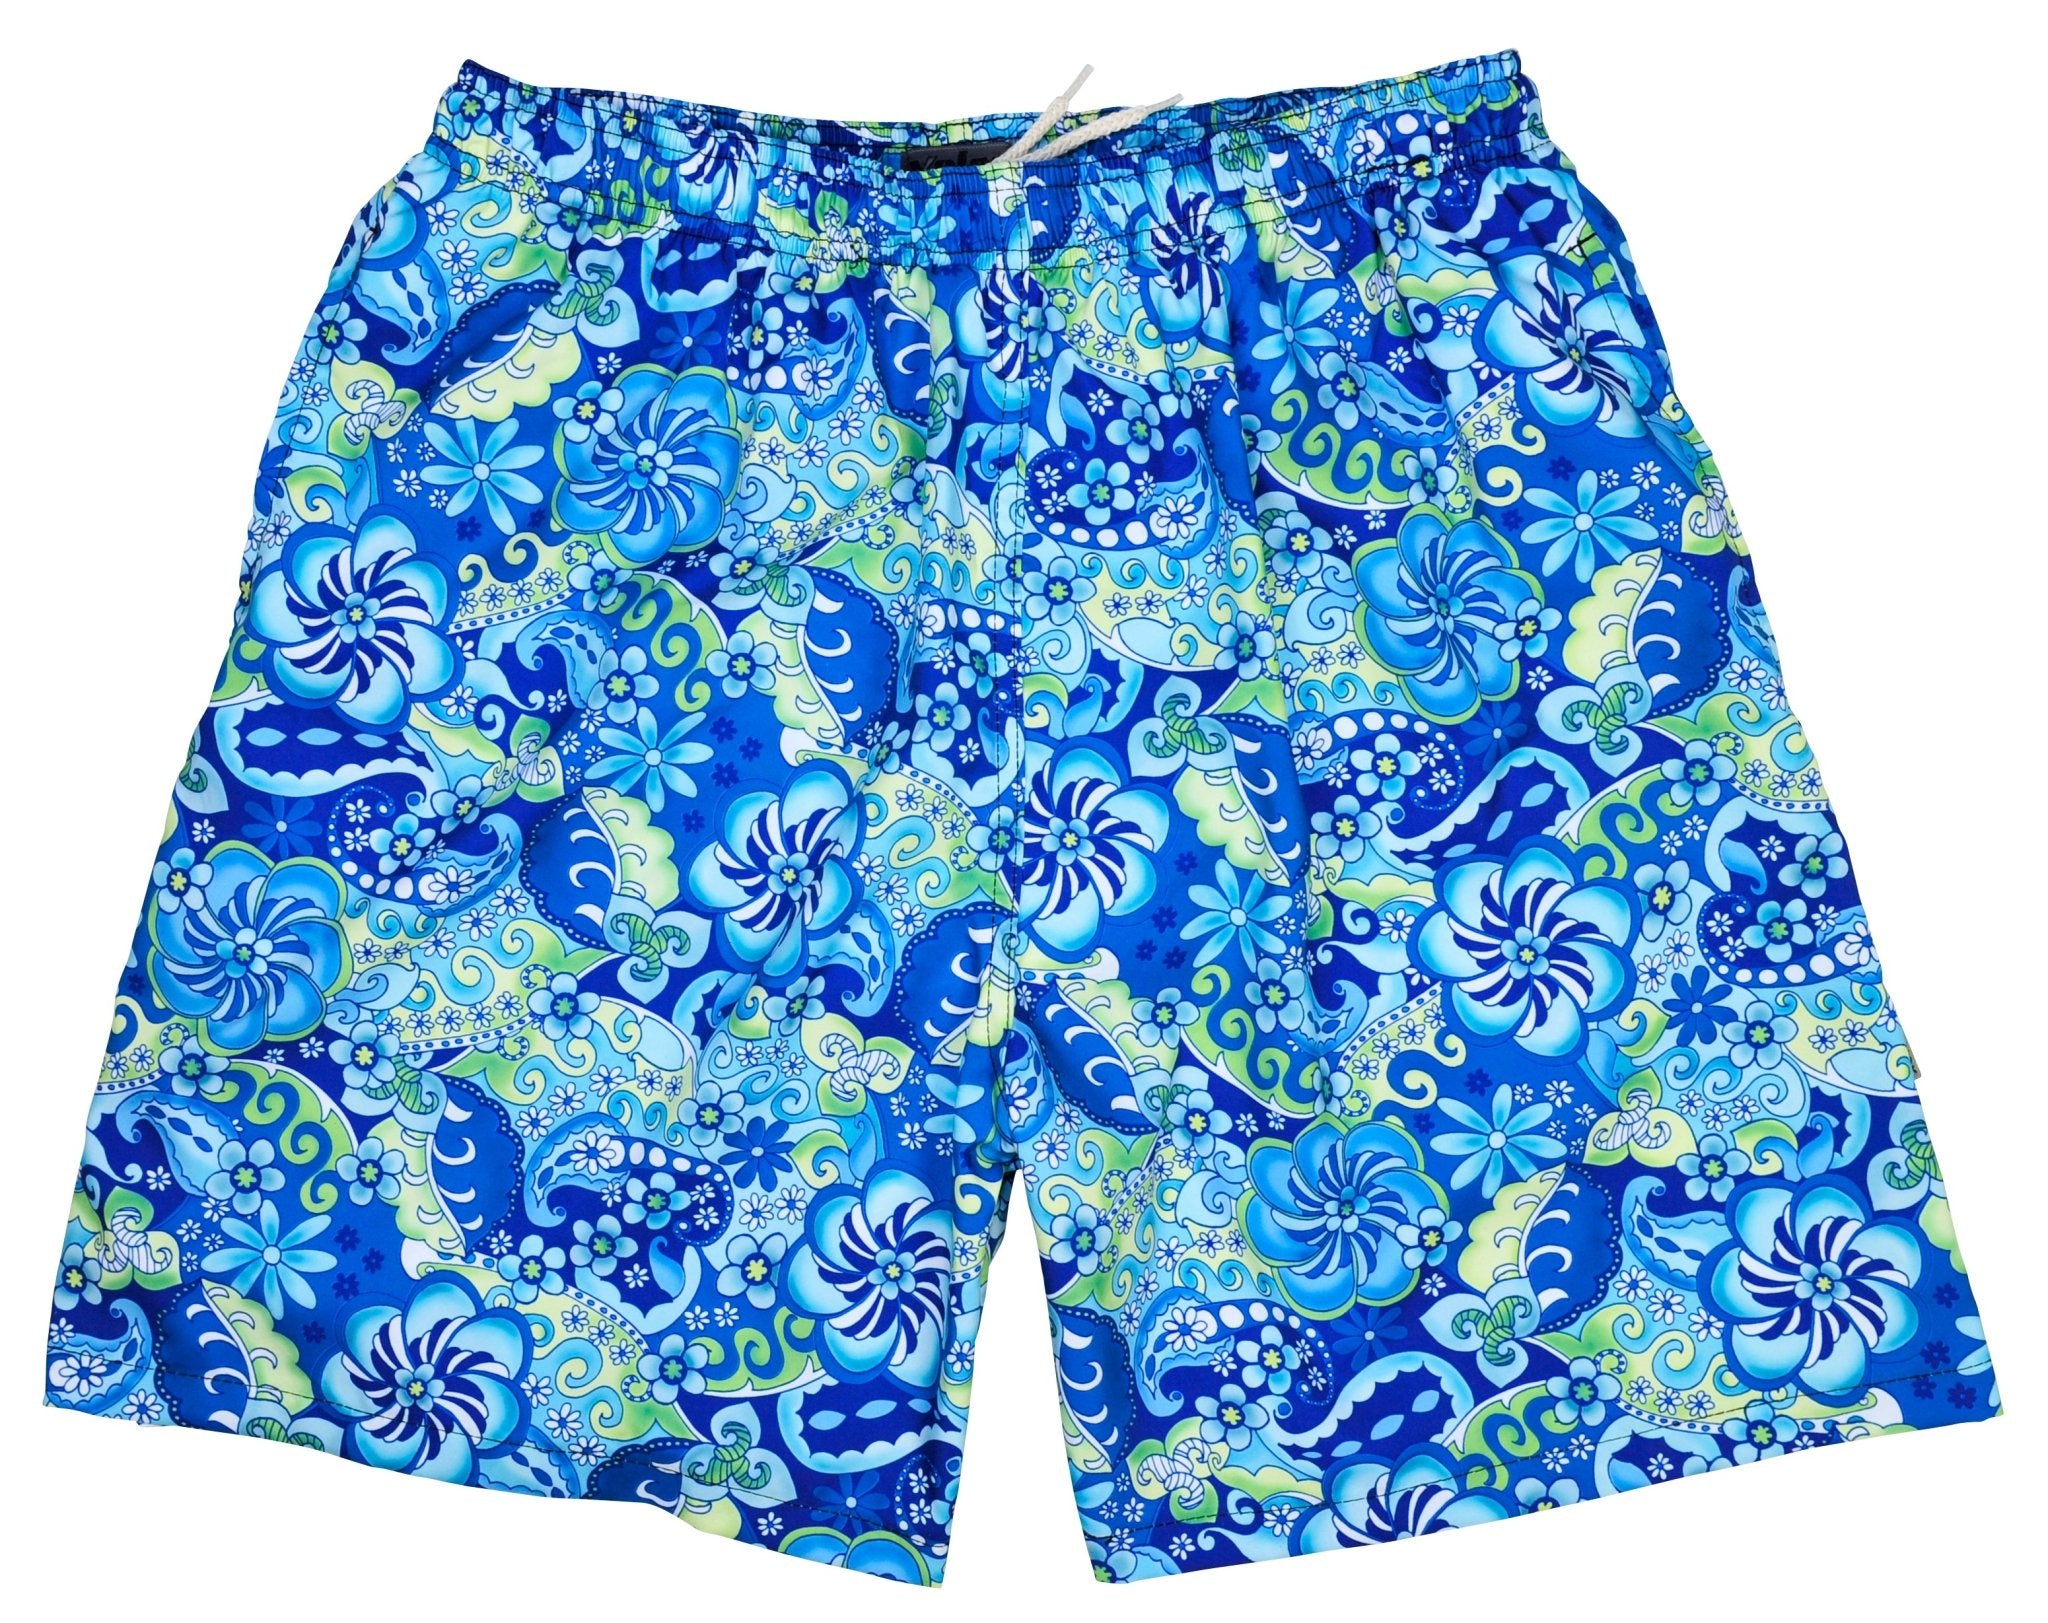 "Lucy in the Sky" (Blue) Swim Trunks (with mesh liner / side pockets) - 6.5" Mid Length - Board Shorts World Outlet